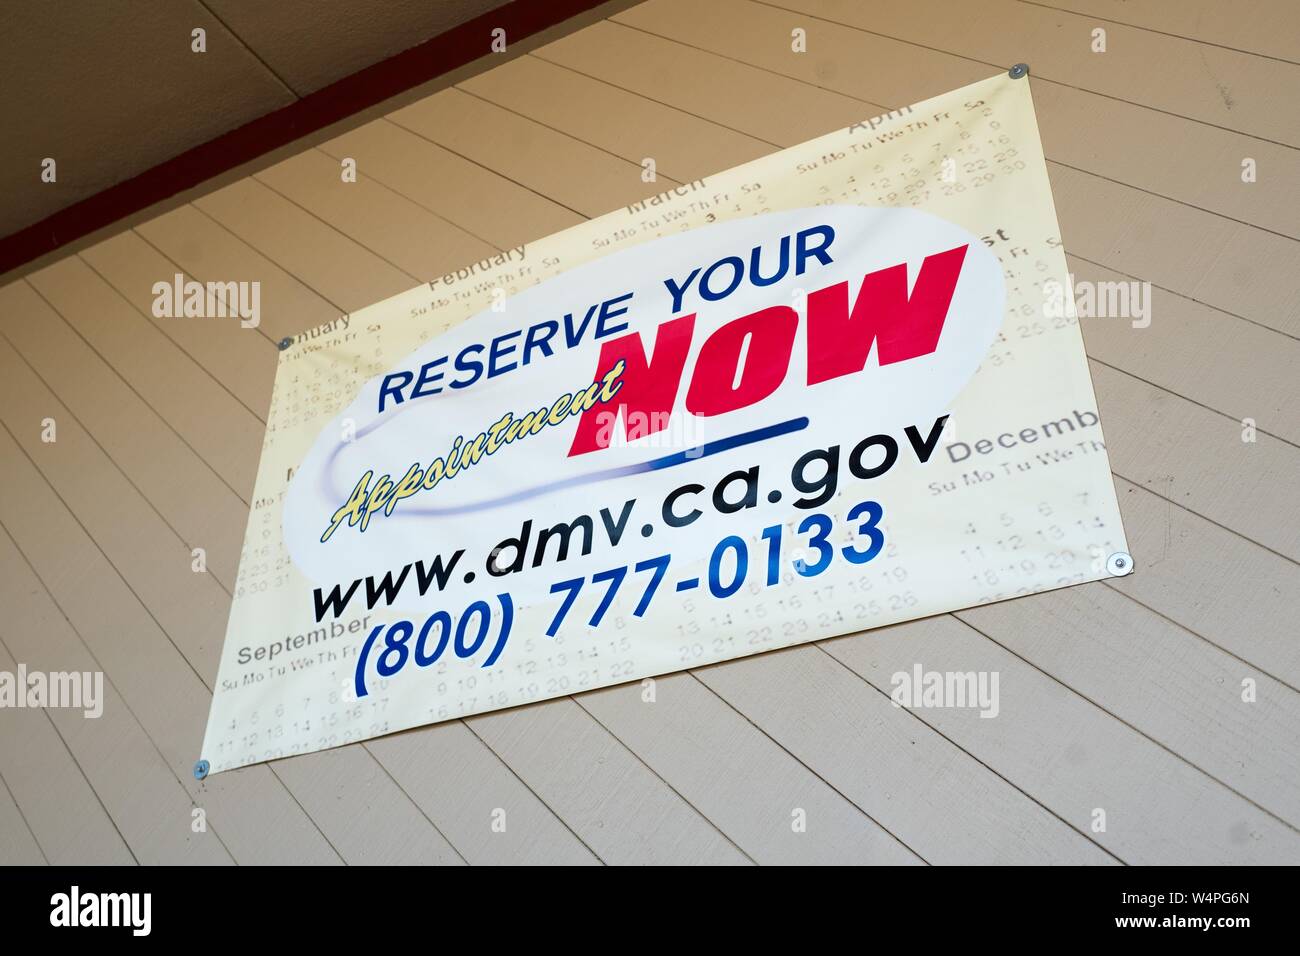 Sign advertising service which allows visitors to book advanced appointments at the California Department of Motor Vehicles (DMV) office in Plesanton, California, August 28, 2018. () Stock Photo